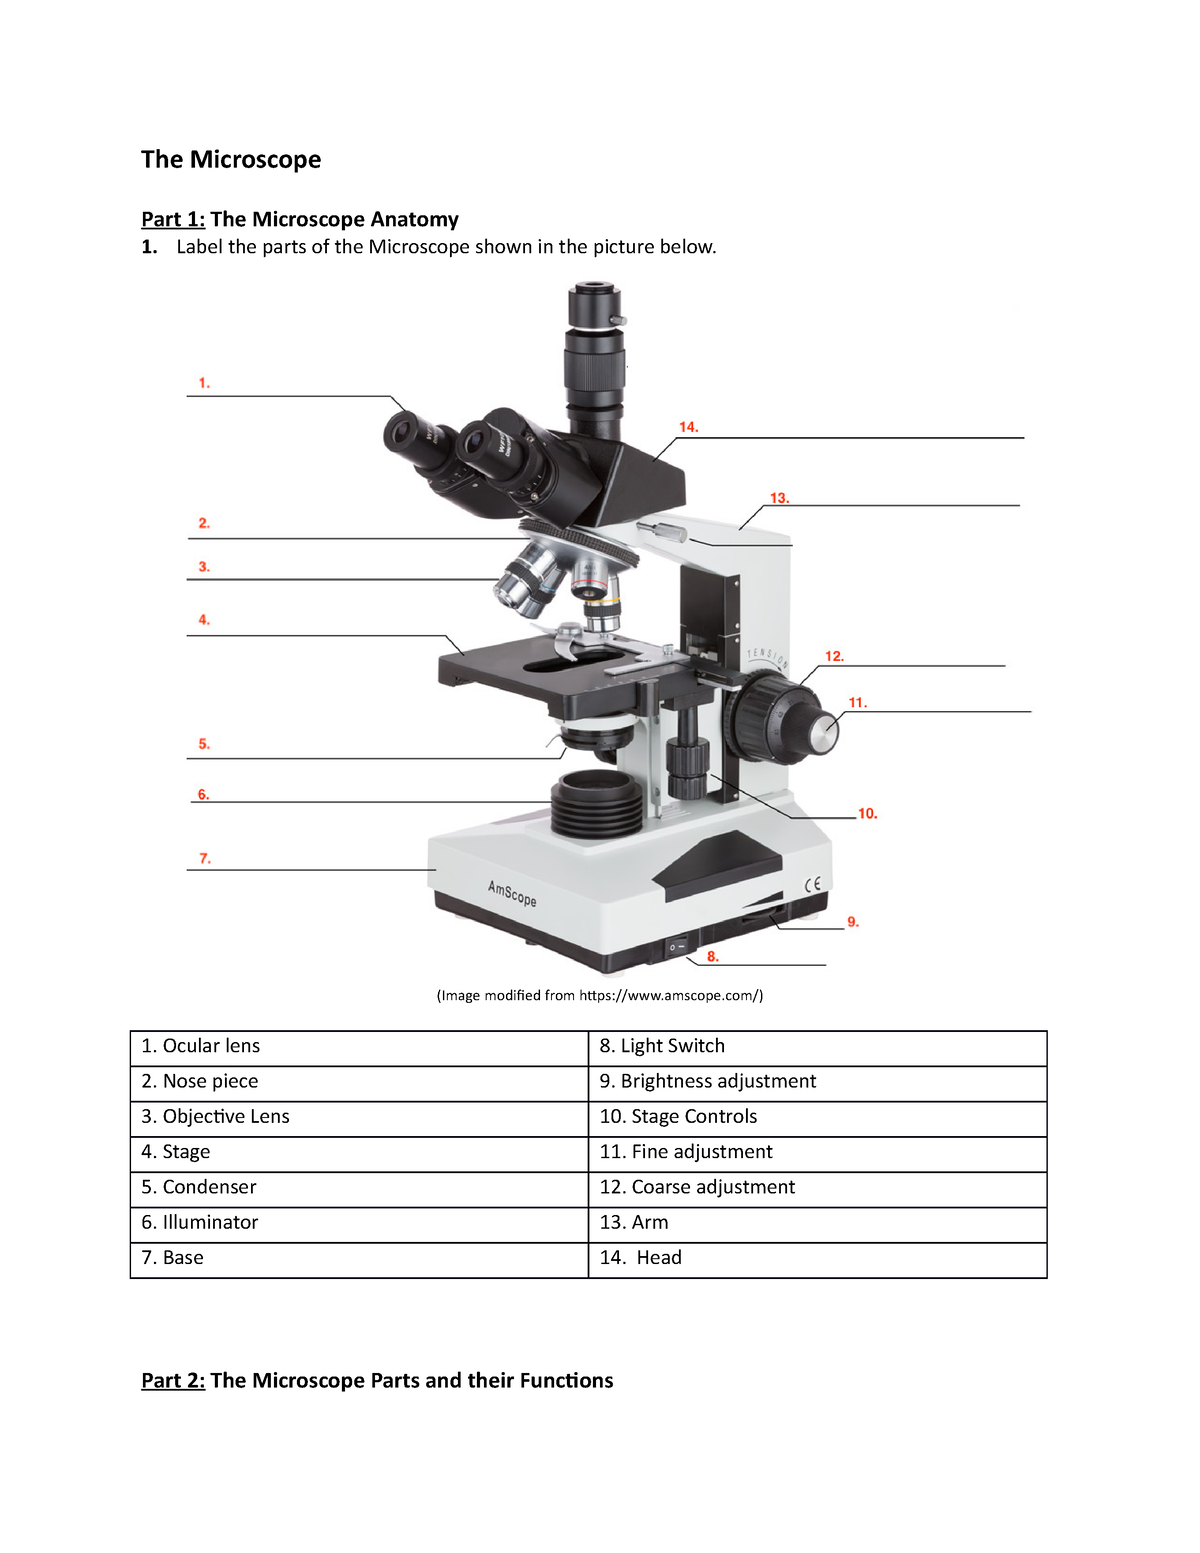 Activtiy Worksheet Microscope - The Microscope Part 1: The Microscope ...